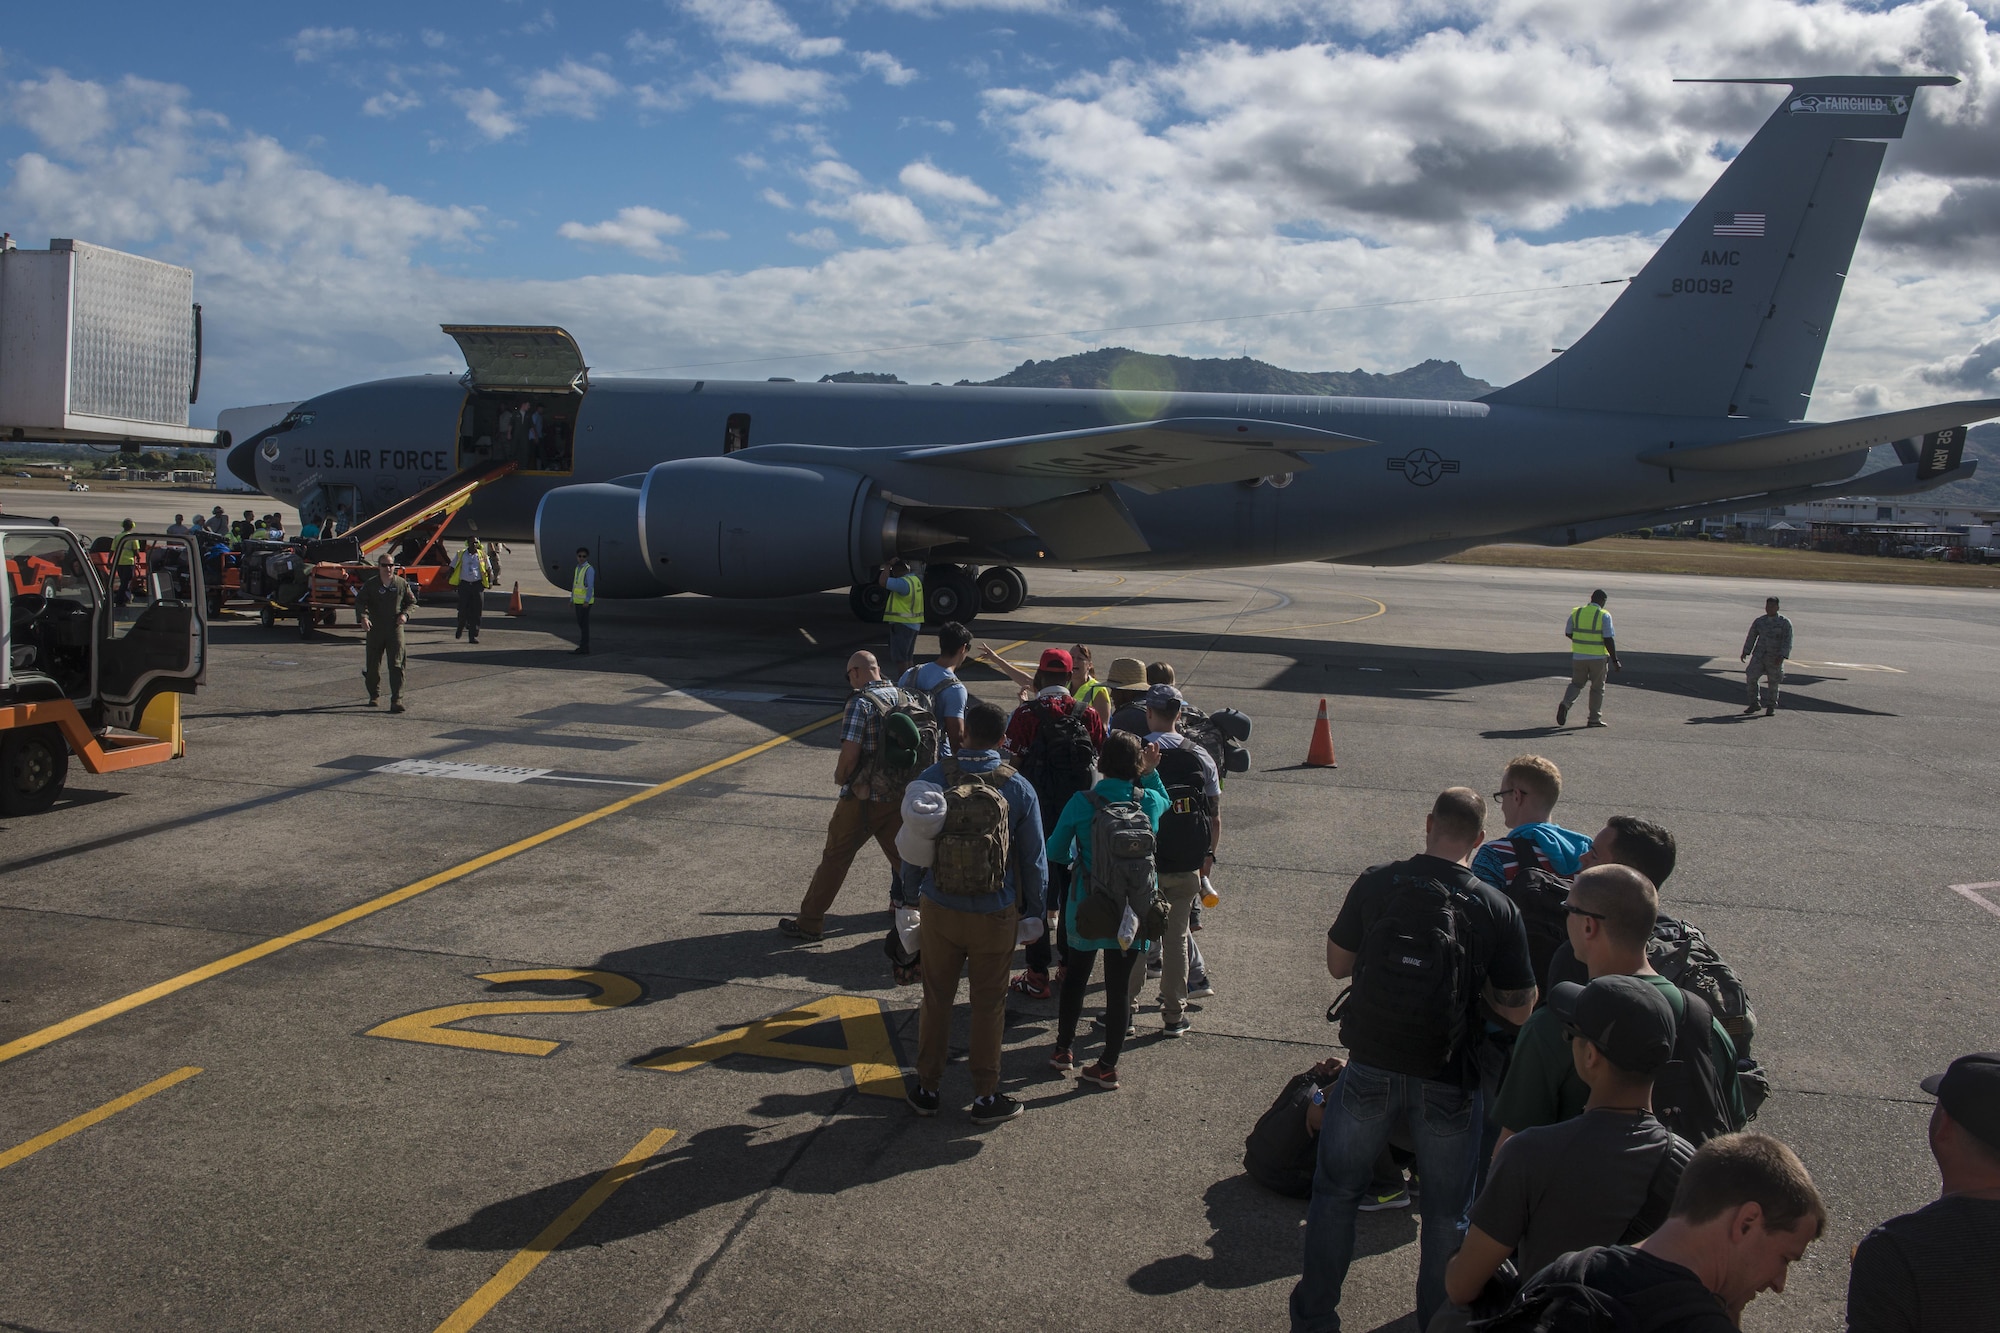 Pacific Angel (PACANGEL) 17-3 main body personnel board a 92nd Air Refueling Wing KC-135 Stratotanker from Fairchild Air Force Base, Wash., for their return flight home at the Nadi International Airport in Fiji, July 25, 2017. The active duty KC-135, flown by a crew completely comprised of Washington Air National Guard Citizen Airmen, provided the primary means of air transportation for PACANGEL 17-3 mission personnel, cargo and supplies. The KC-135 and its crew ensured the operation could execute by sustained rapid global mobility and continuous regional development through mobility partnerships as members of the Air Mobility Command. (U.S. Air Force photo/Tech. Sgt. Benjamin W. Stratton)